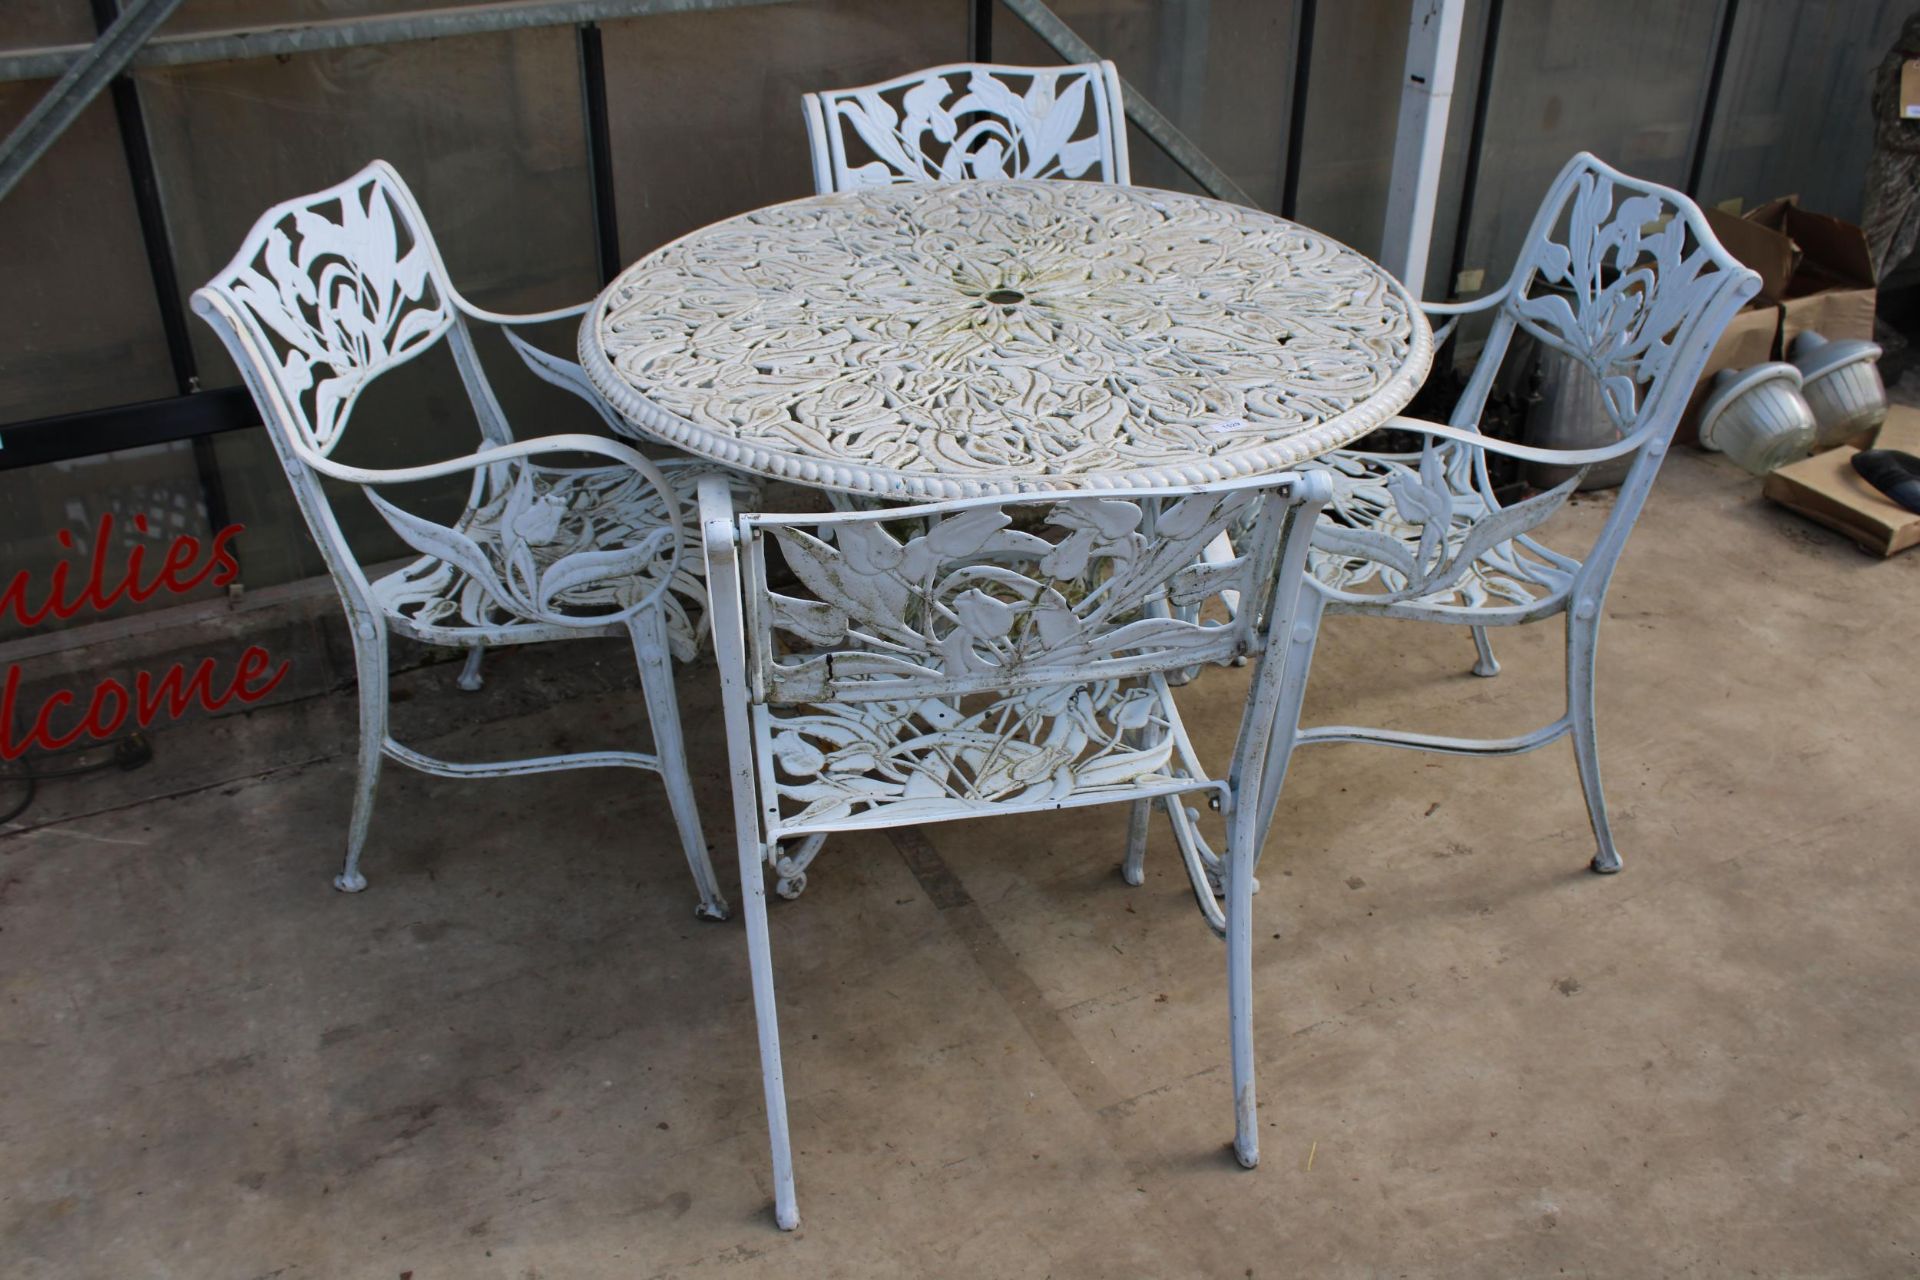 A WHITE CAST ALLOY BISTRO SET COMPRISING OF A LARGE ROUND TABLE AND FOUR CARVER CHAIRS